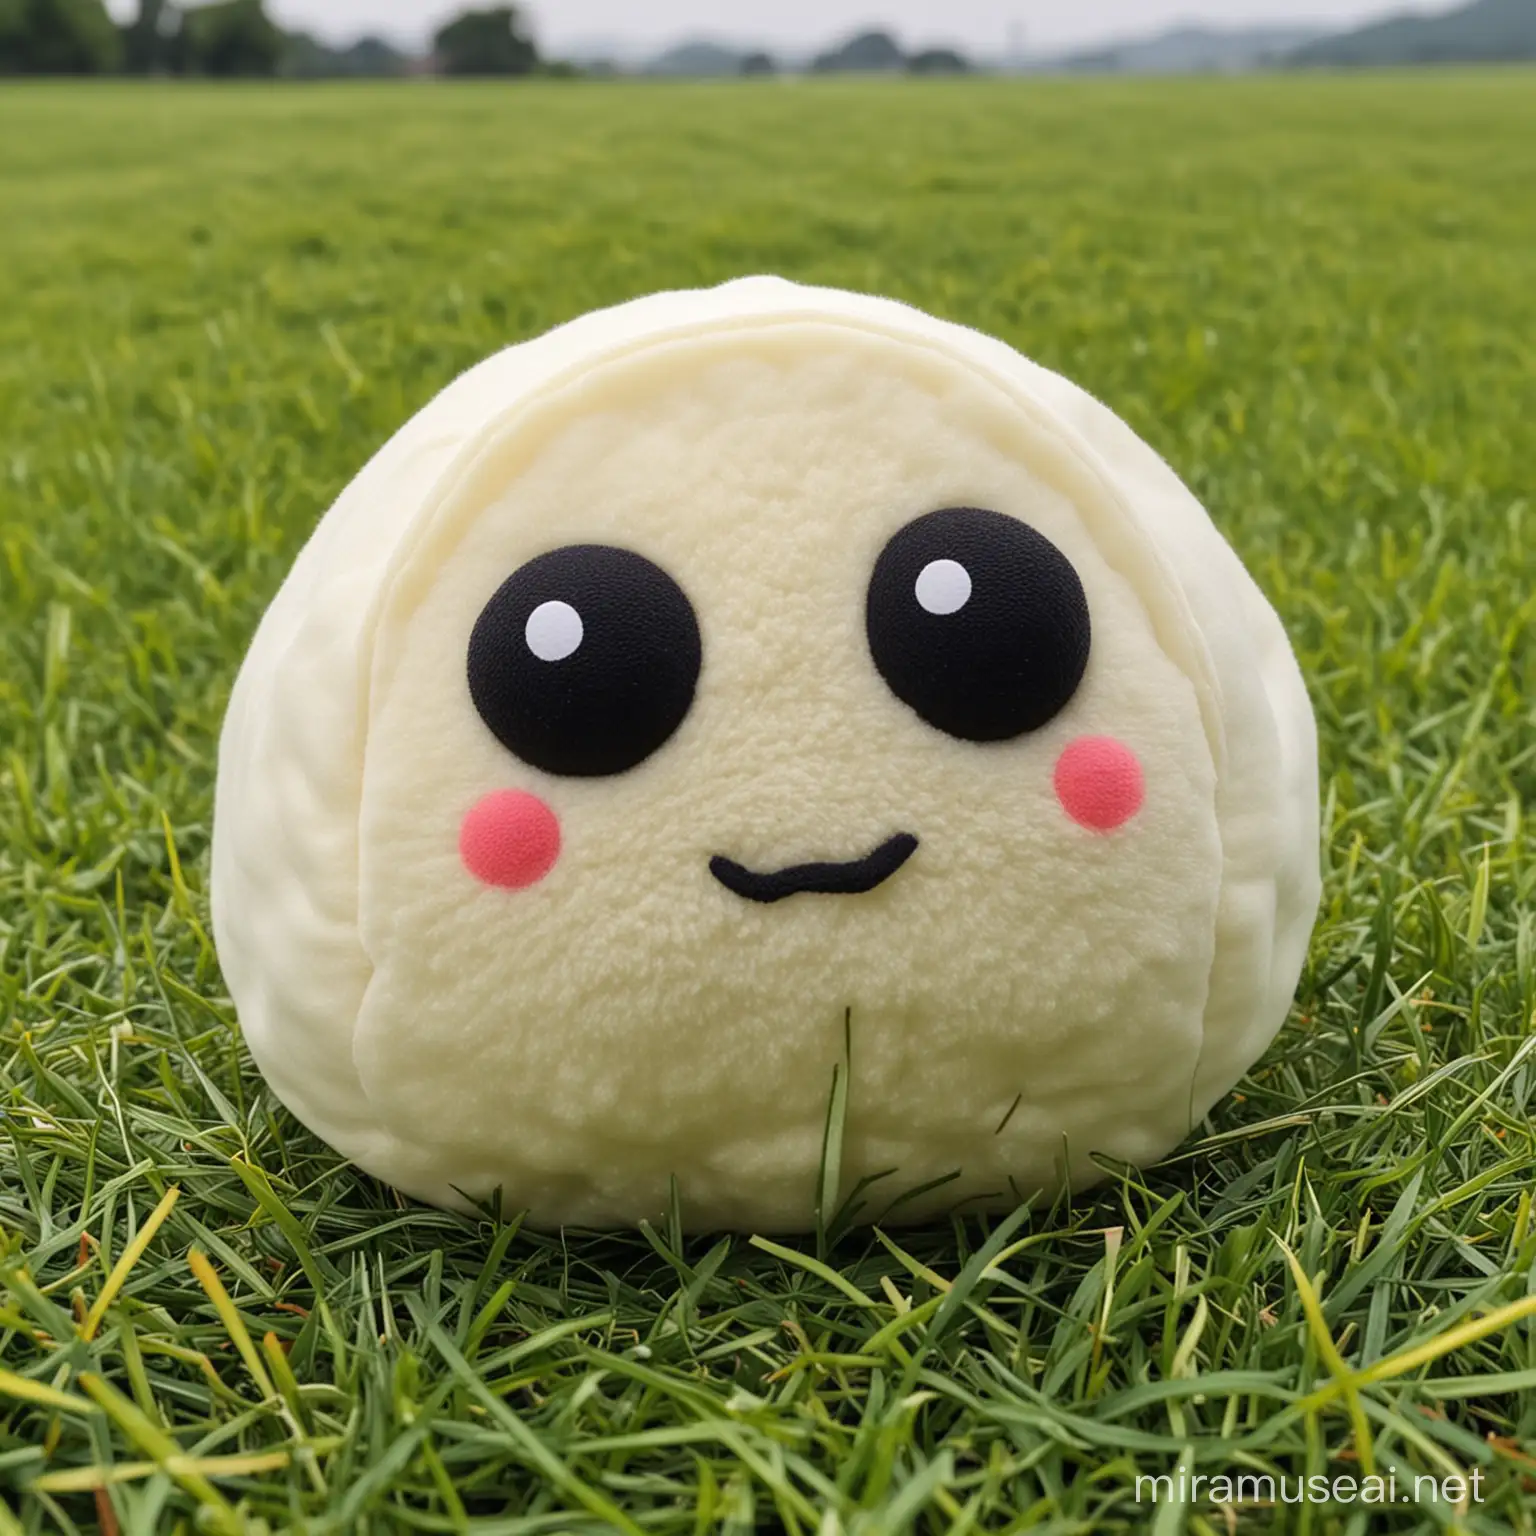 make 3D, stuffed toy the shape of a dumpling, no mouth, simple black circles for eyes, background is a grassy field